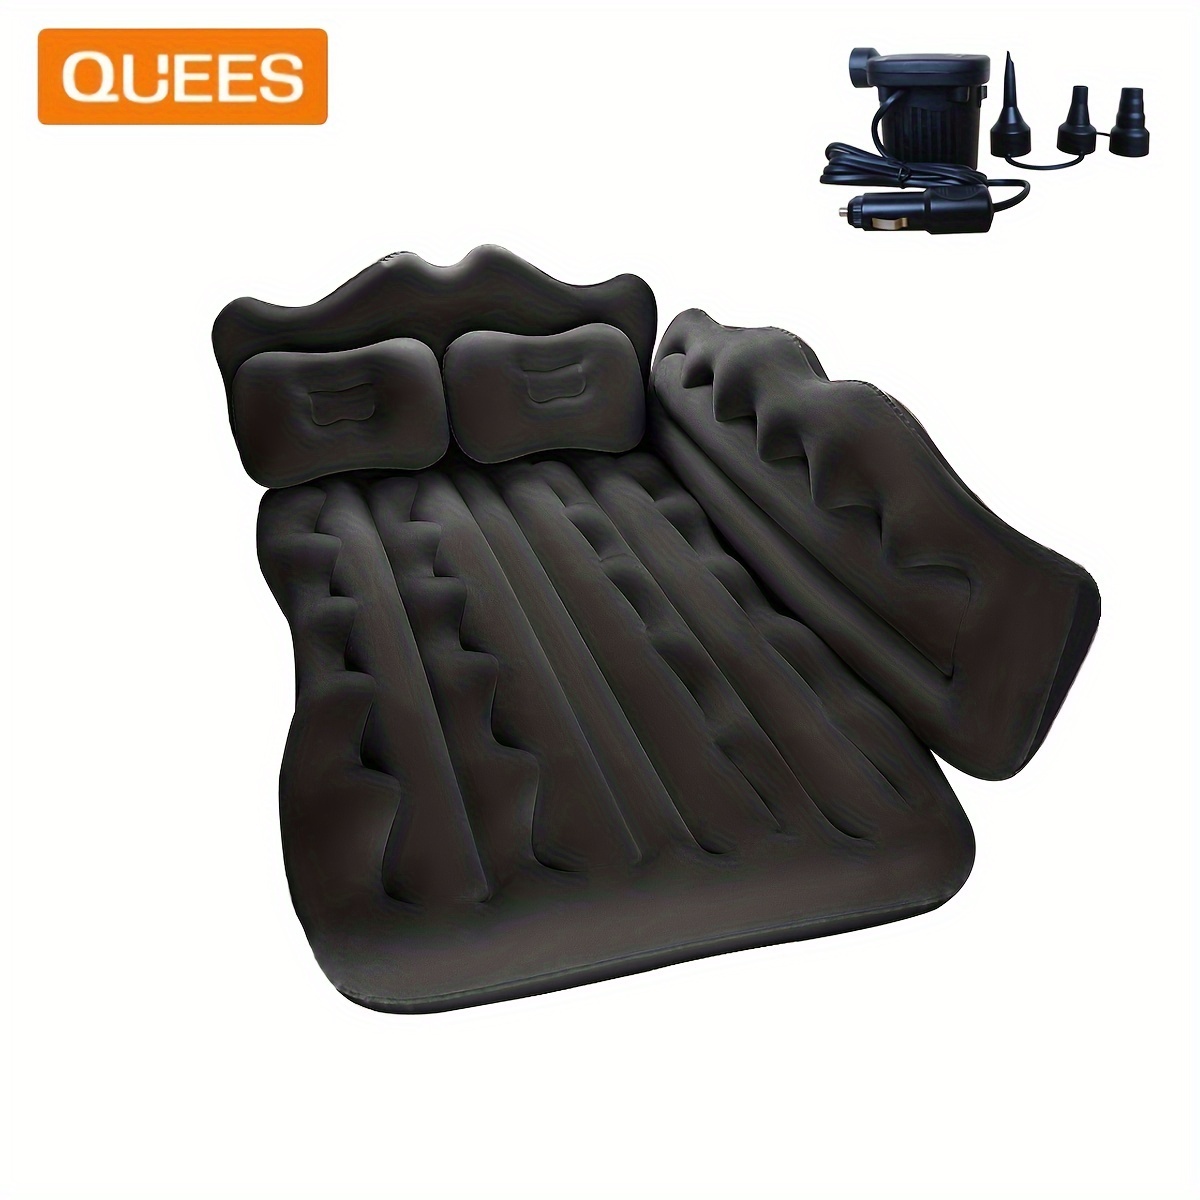 

Inflatable Air Bed With Enlarged Sidestops For Home, Camping Mattress Thickened Flocking & Pvc Surface With Pump For Sleeping